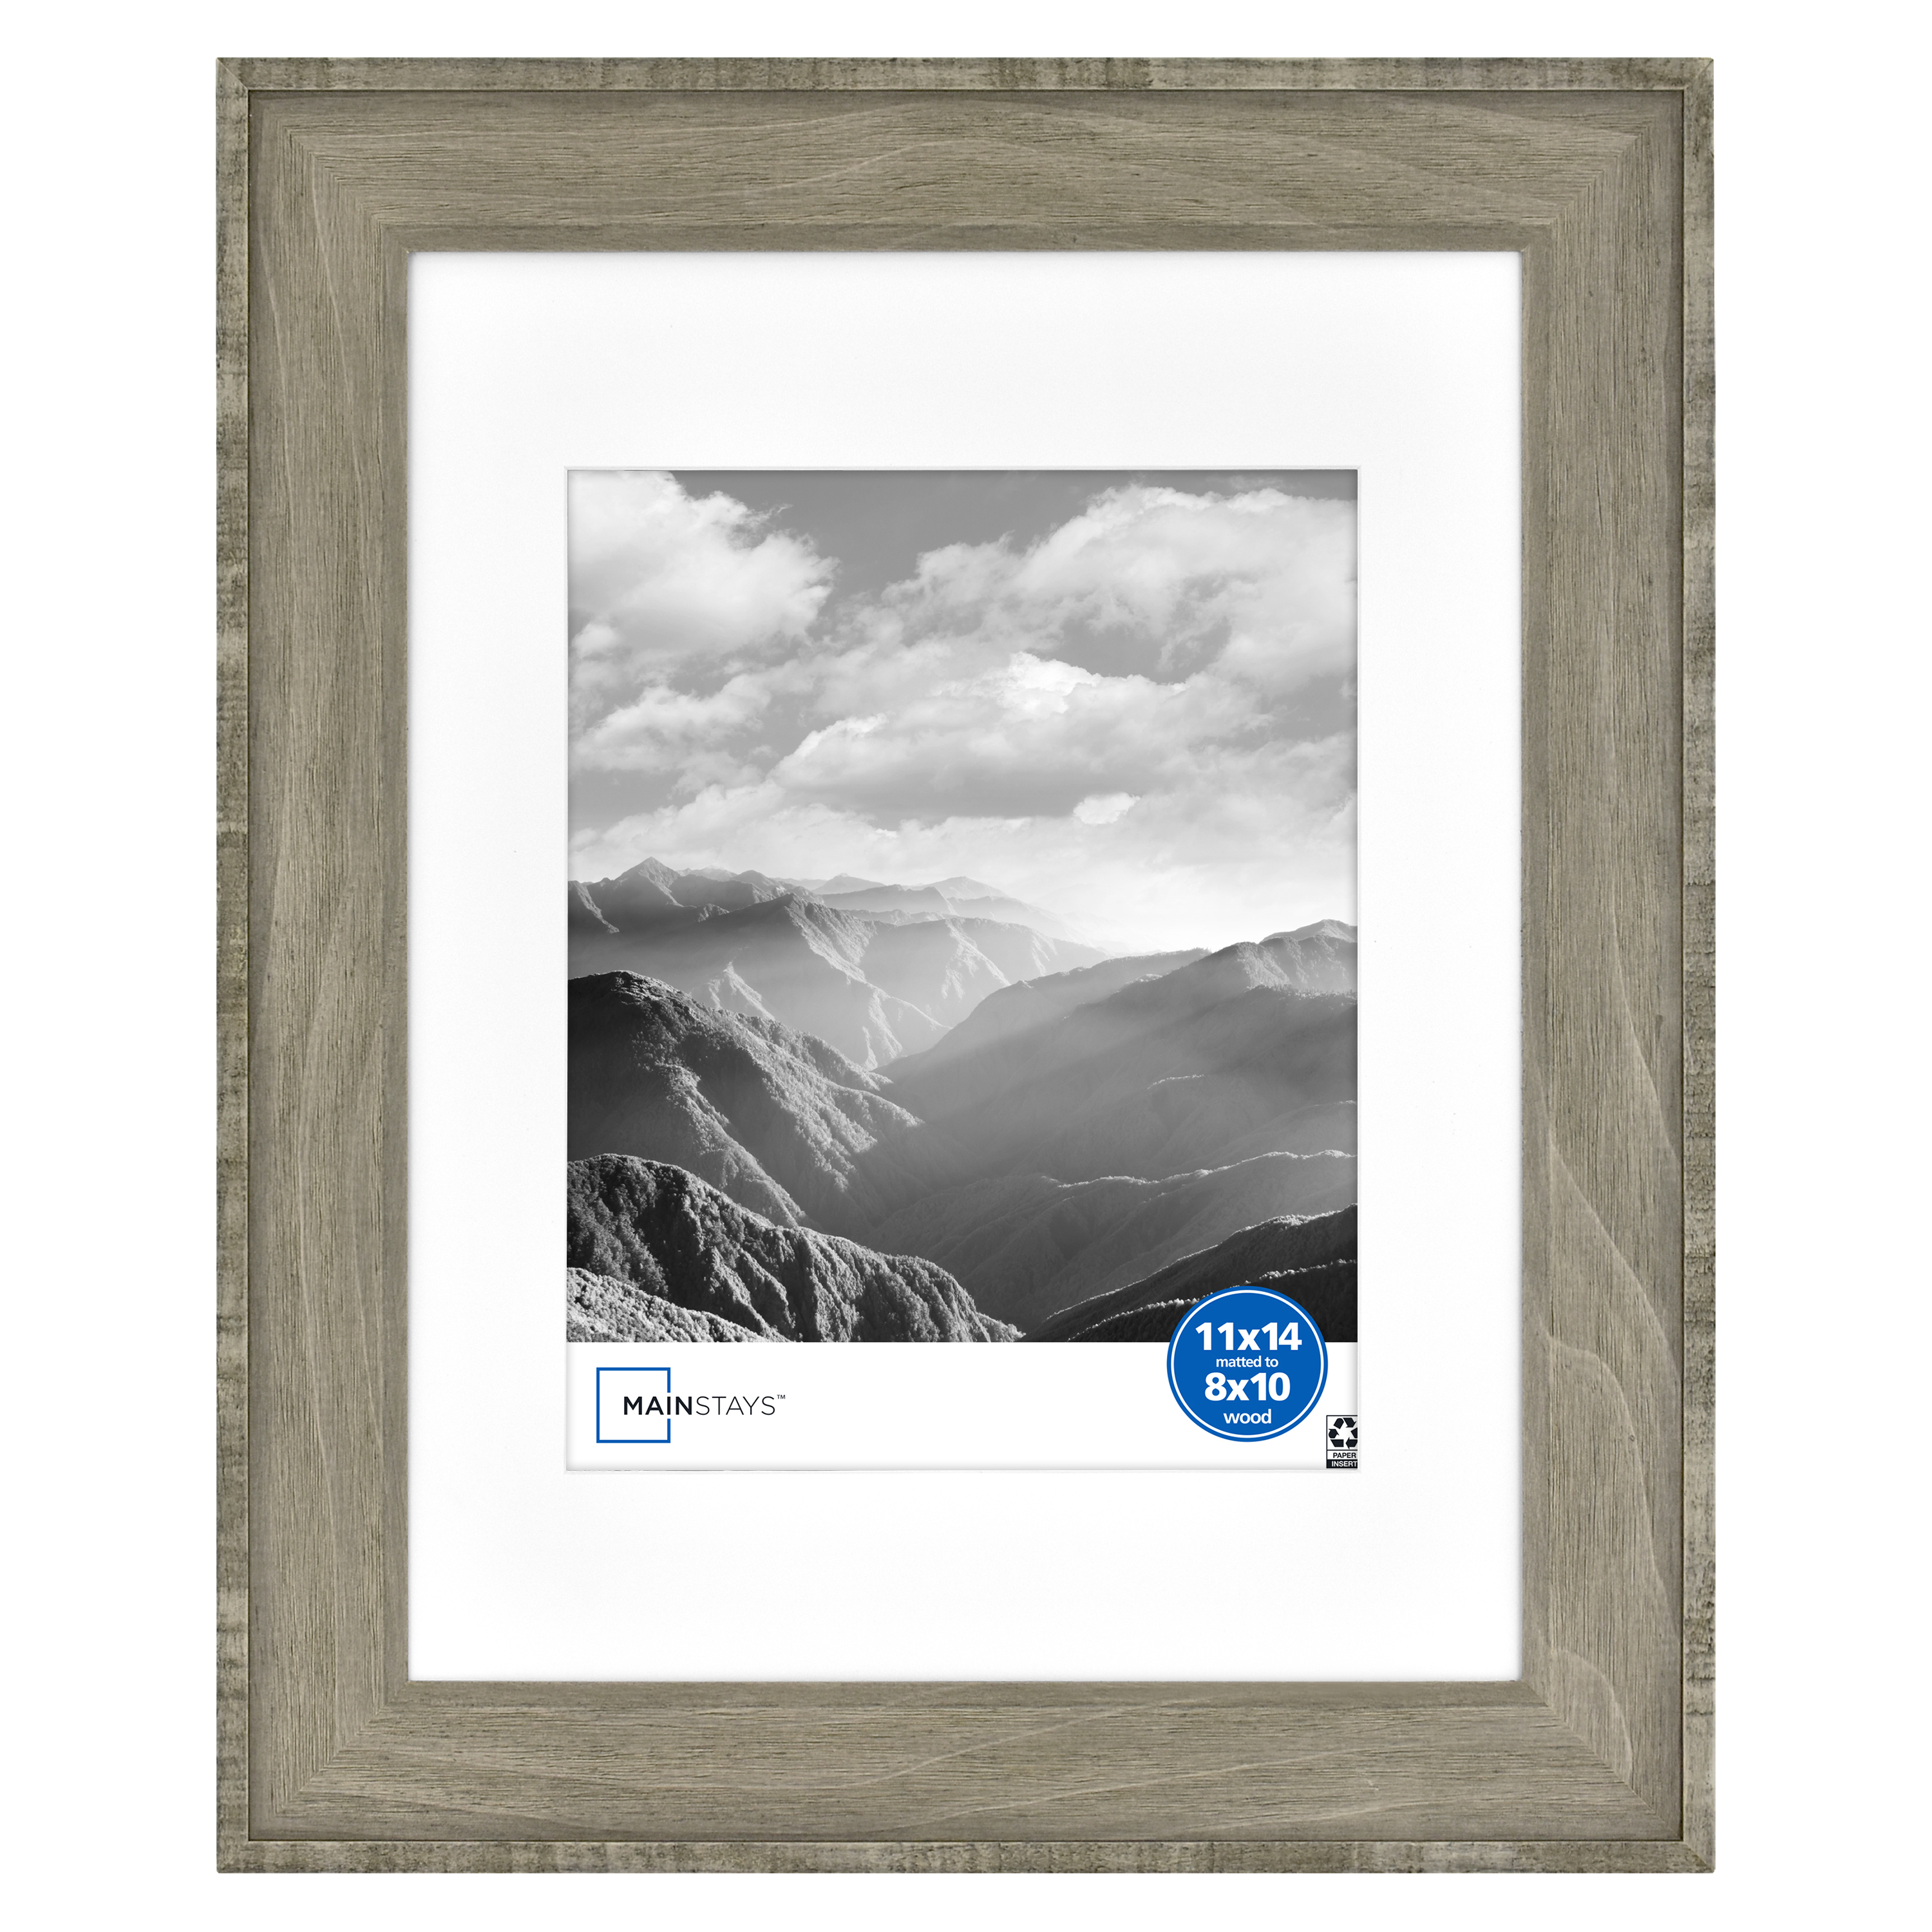 Mainstays 11"x14" matted to 8"x10" Rustic Wood Gallery Picture Wall Frame - image 1 of 6